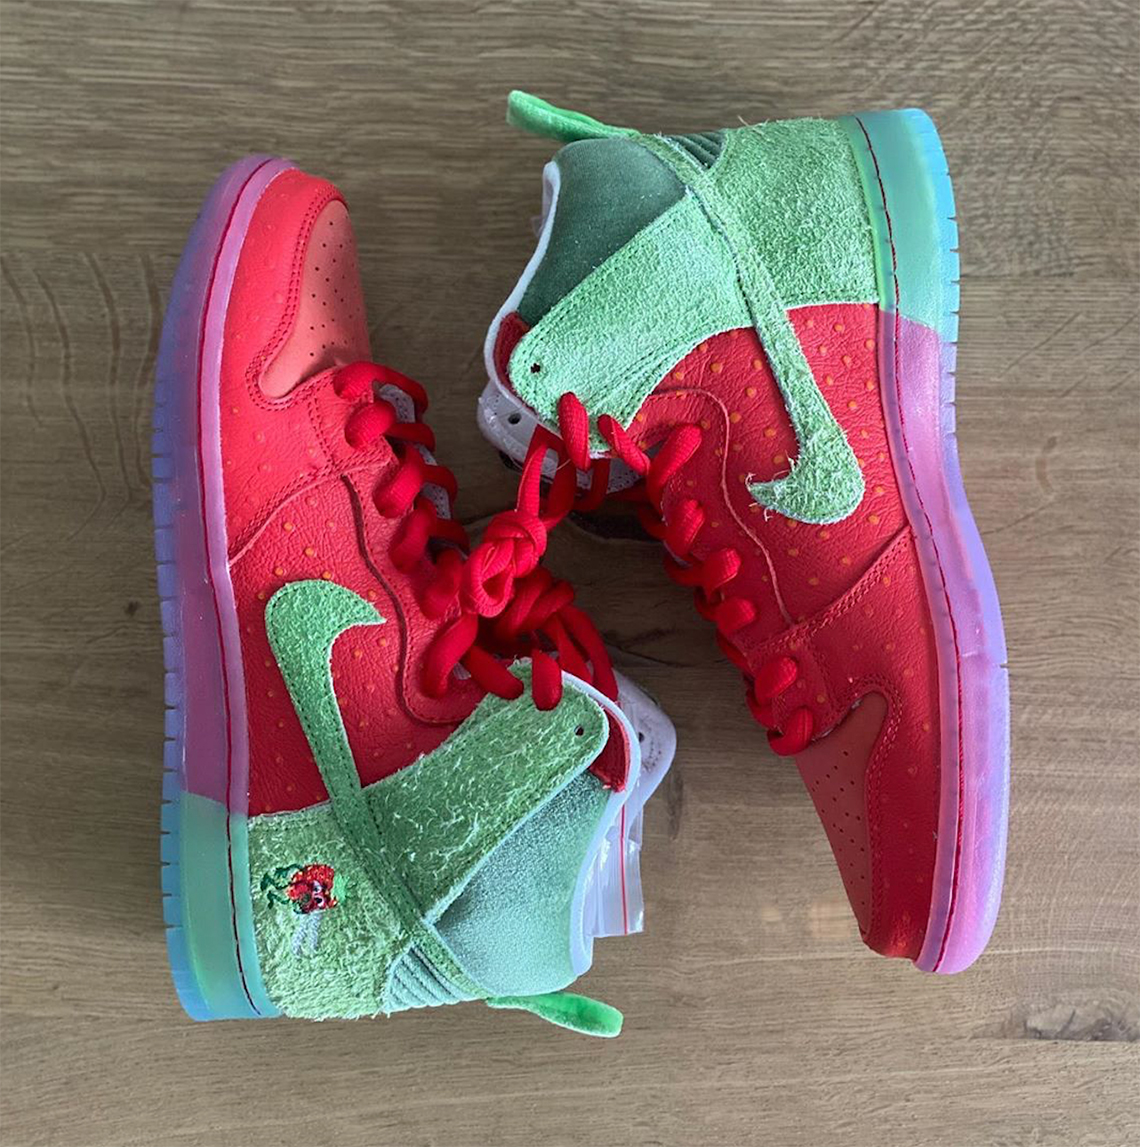 Strawberry Cough nike fluorescent Sb Dunk High 6